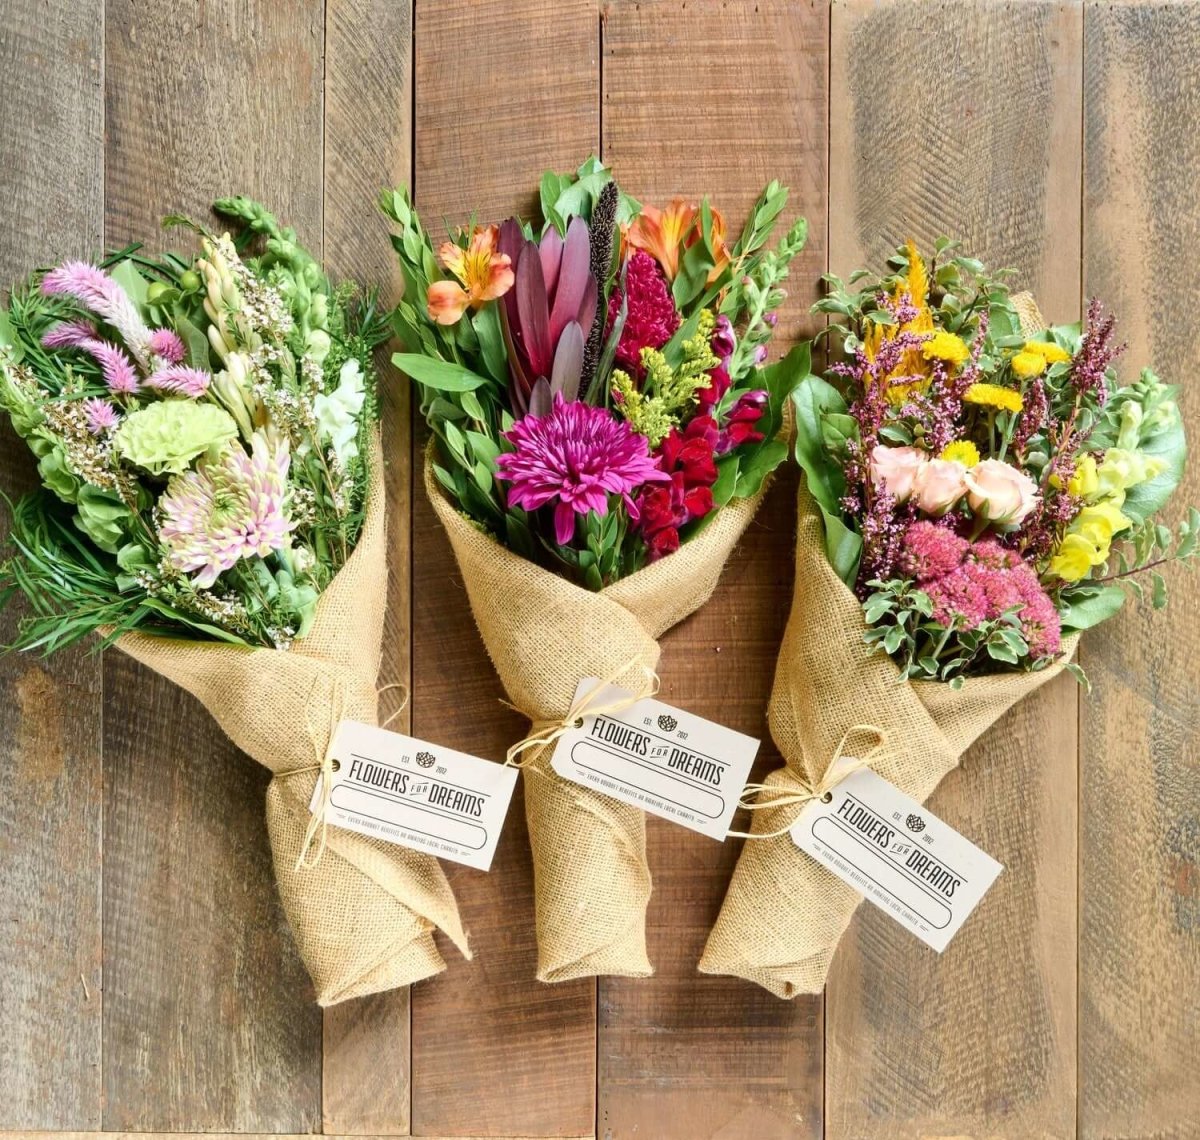 Artisan Weekly Subscription - Flowers for Dreams